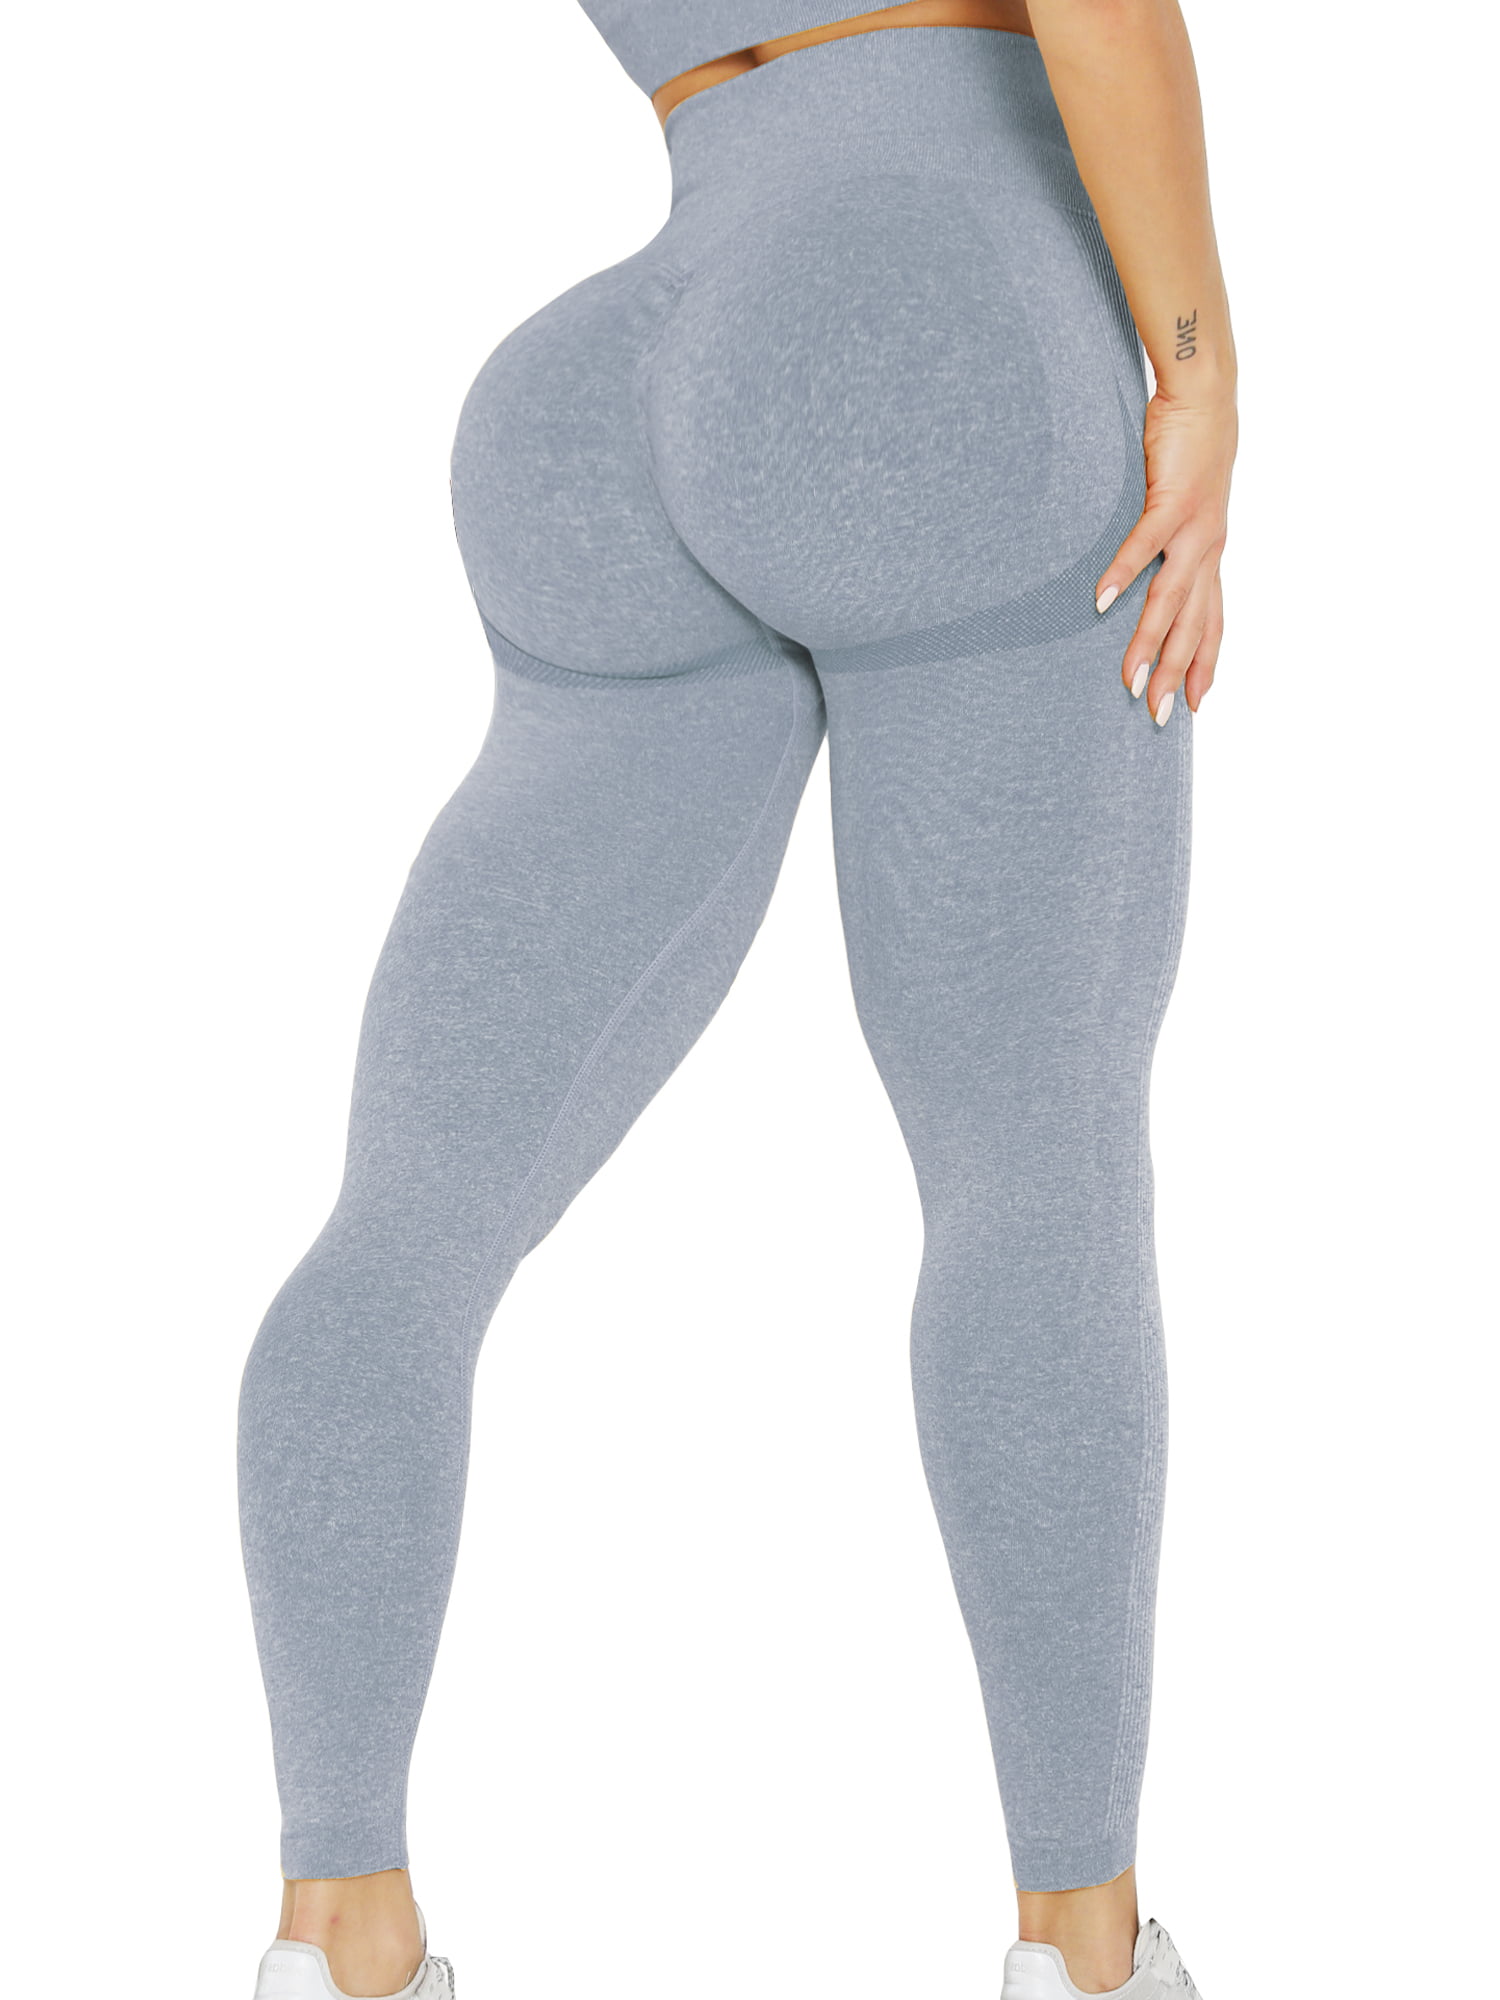 Leggings Or Yoga Pants  International Society of Precision Agriculture